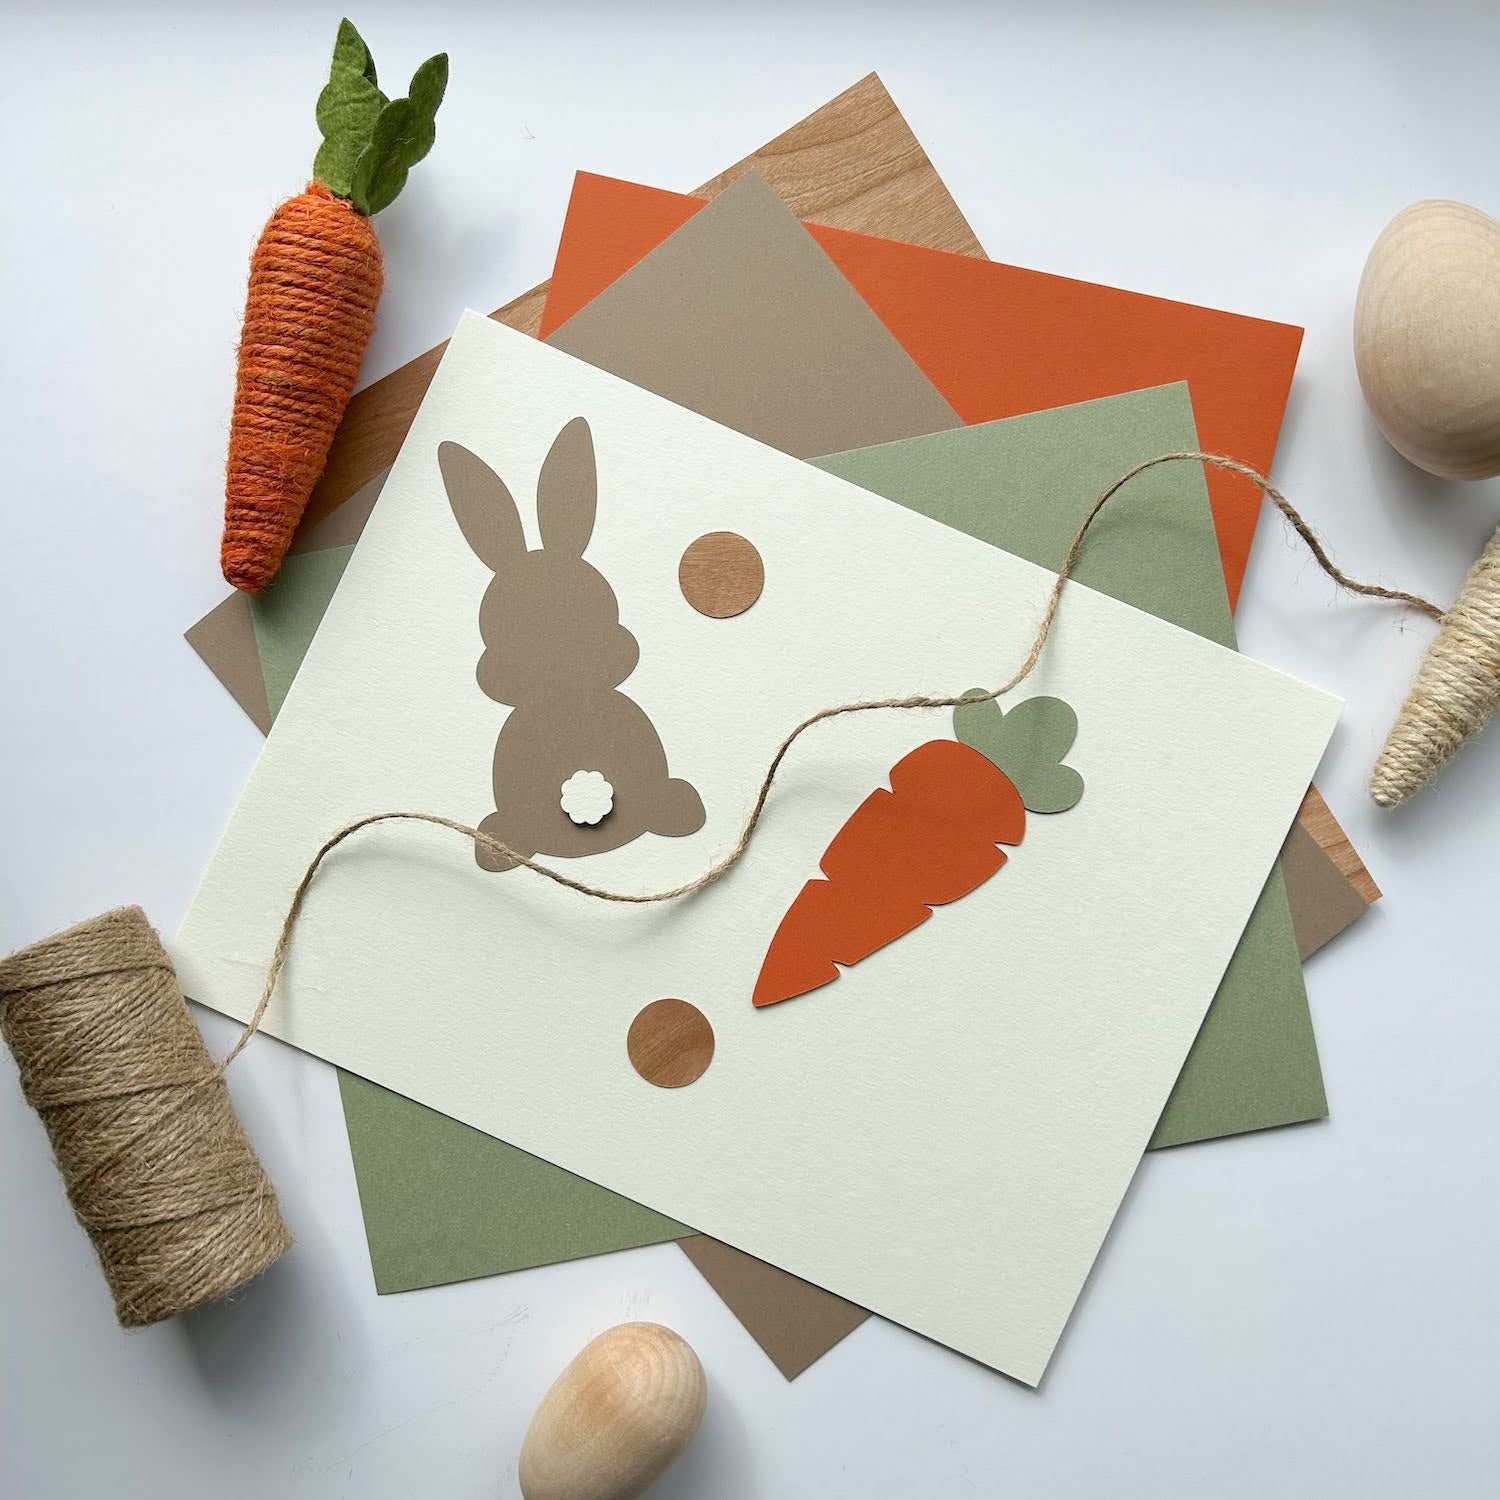 Woodstock Cardstock Bunny and Carrot Die -Cuts